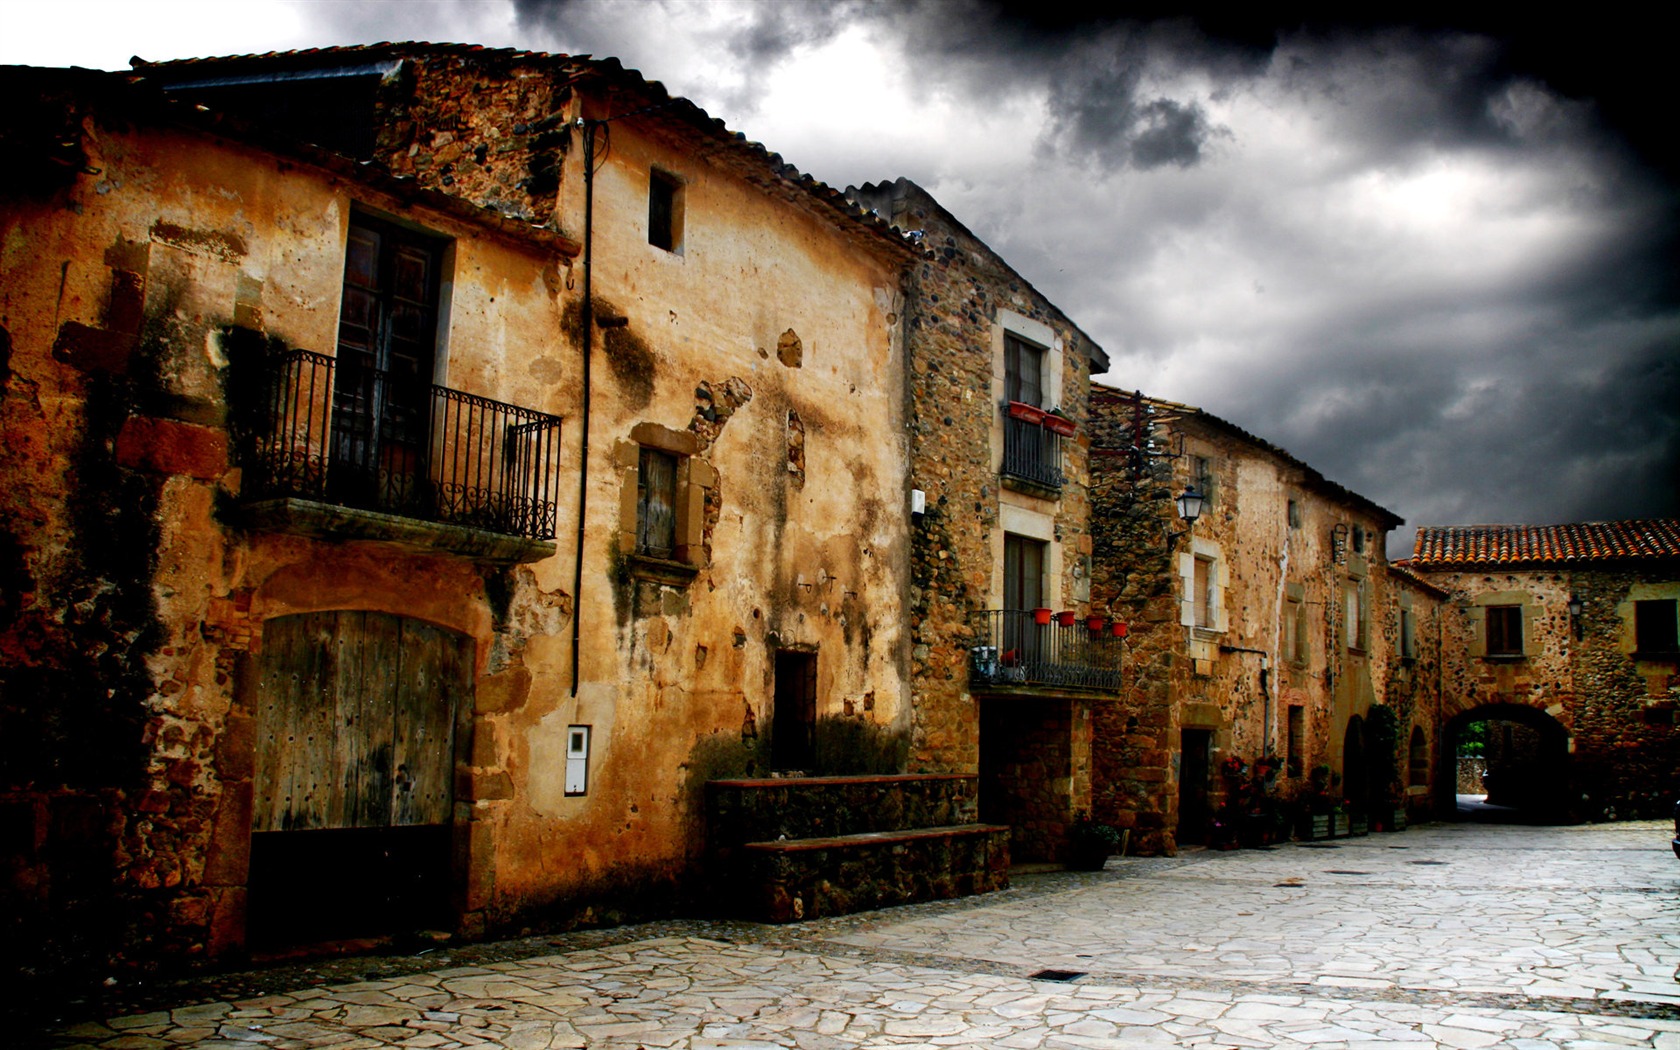 Spain Girona HDR-style wallpapers #11 - 1680x1050